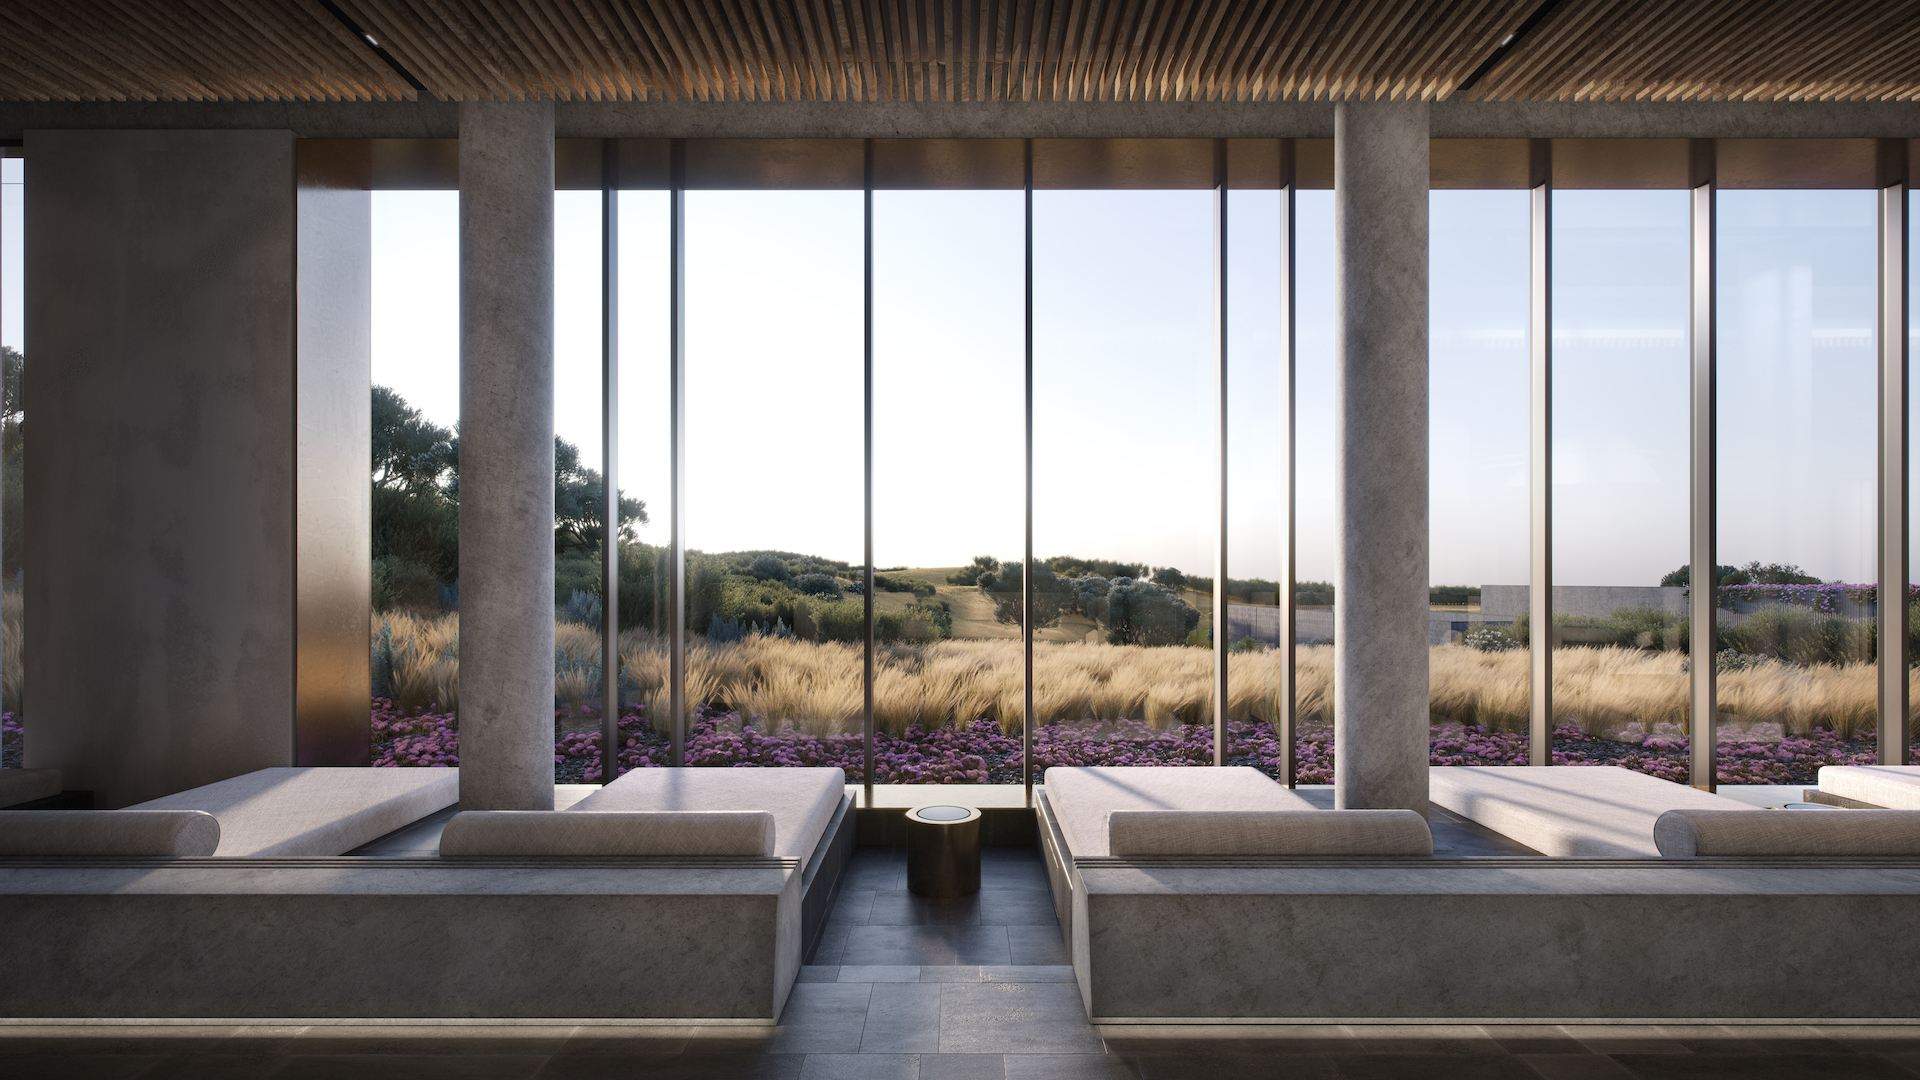 The Mornington Peninsula's New Alba Thermal Springs and Spa Is Now Taking Bookings From Spring